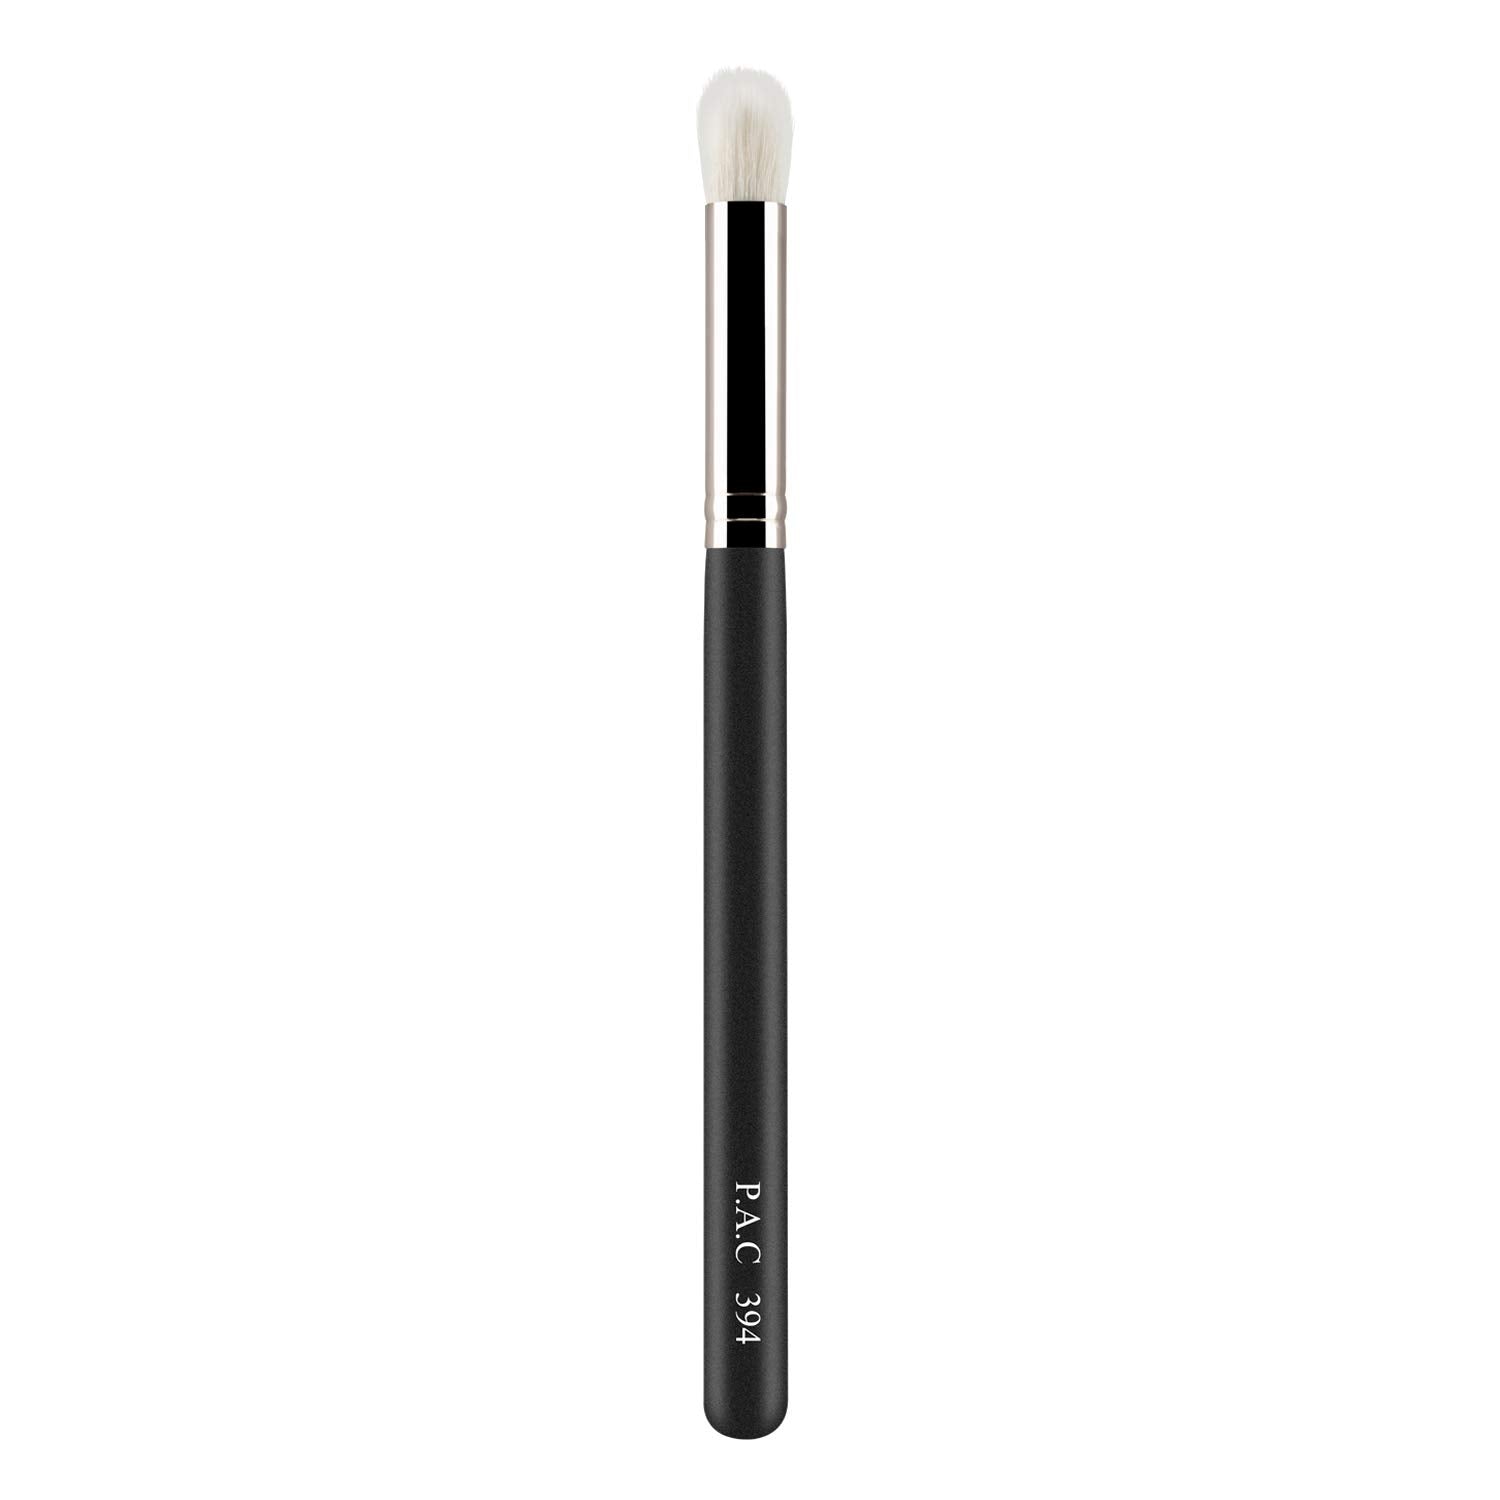 PAC Concealer Brush 394 PAC